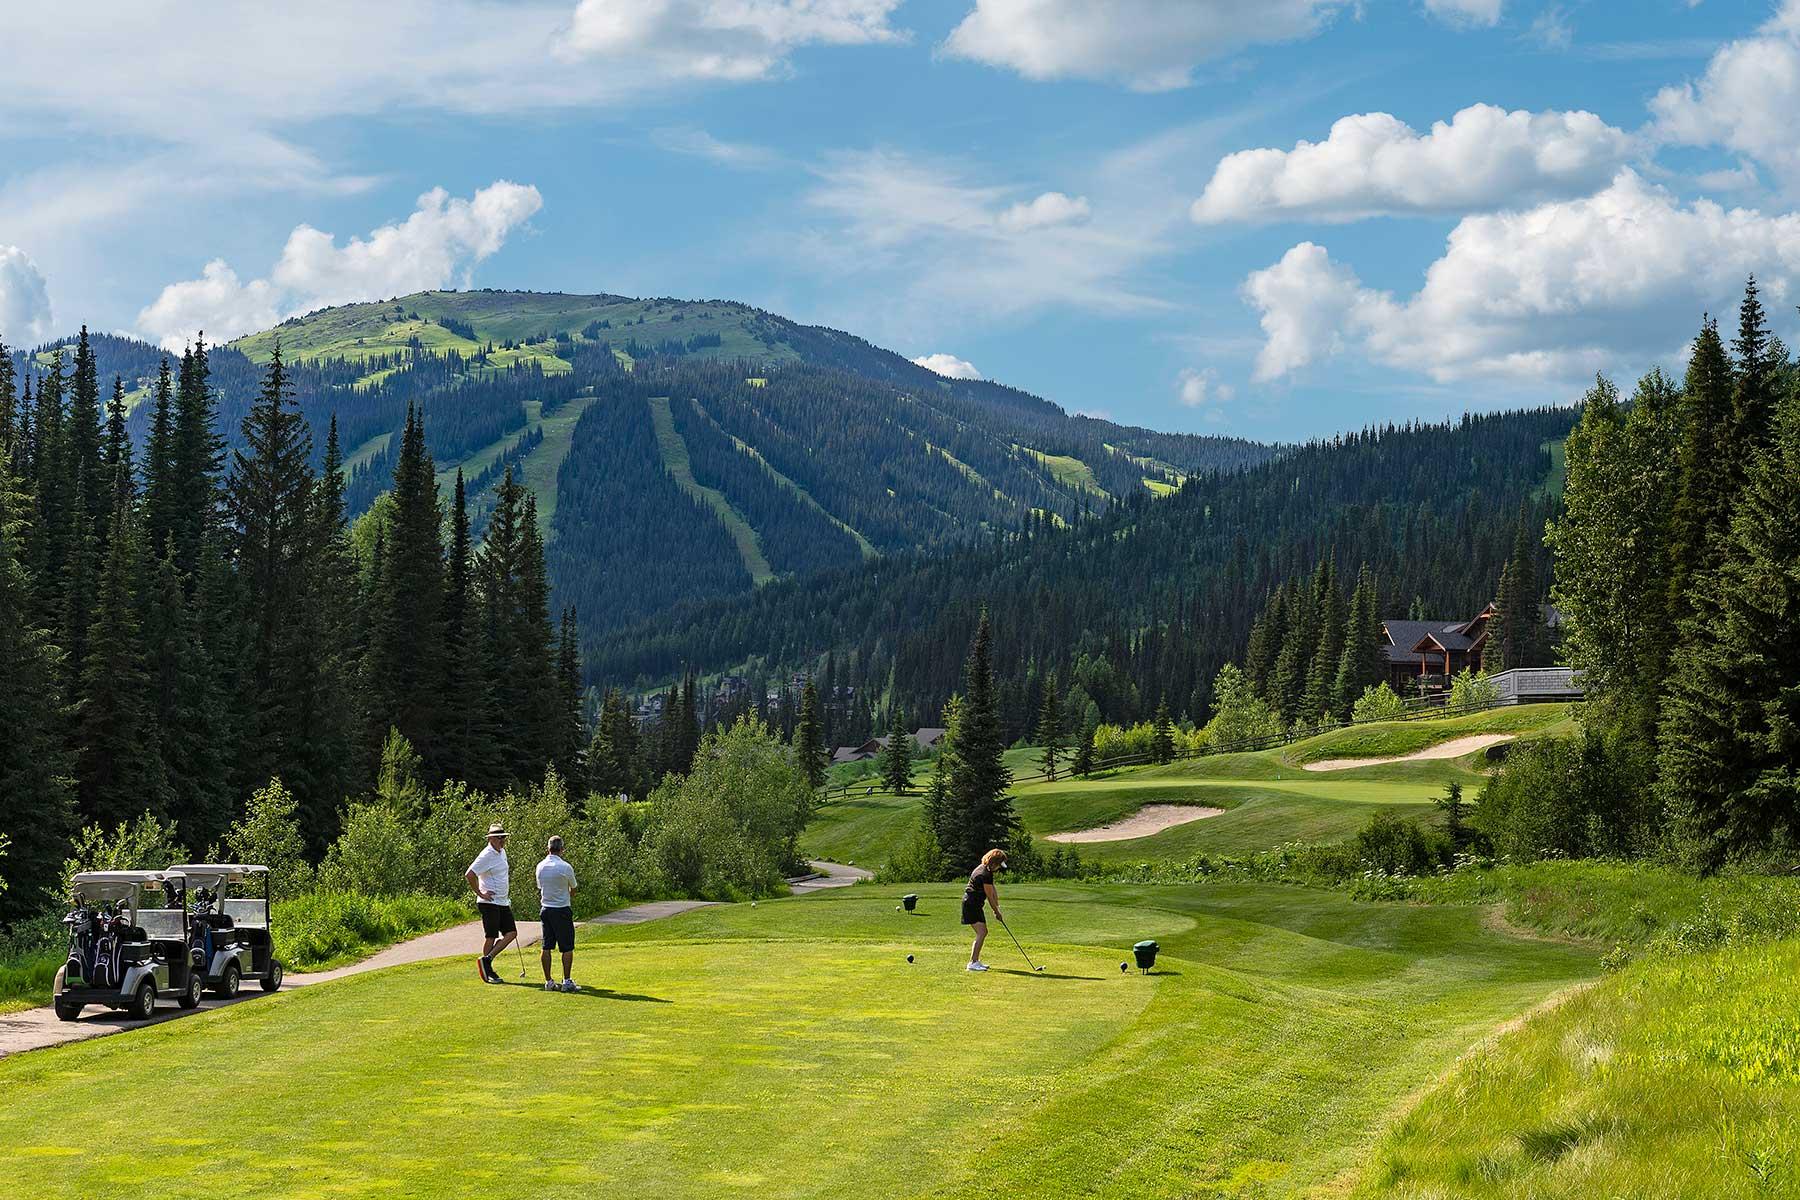 Golfer's teeing off on hole 15 at Sun Peaks Golf Course